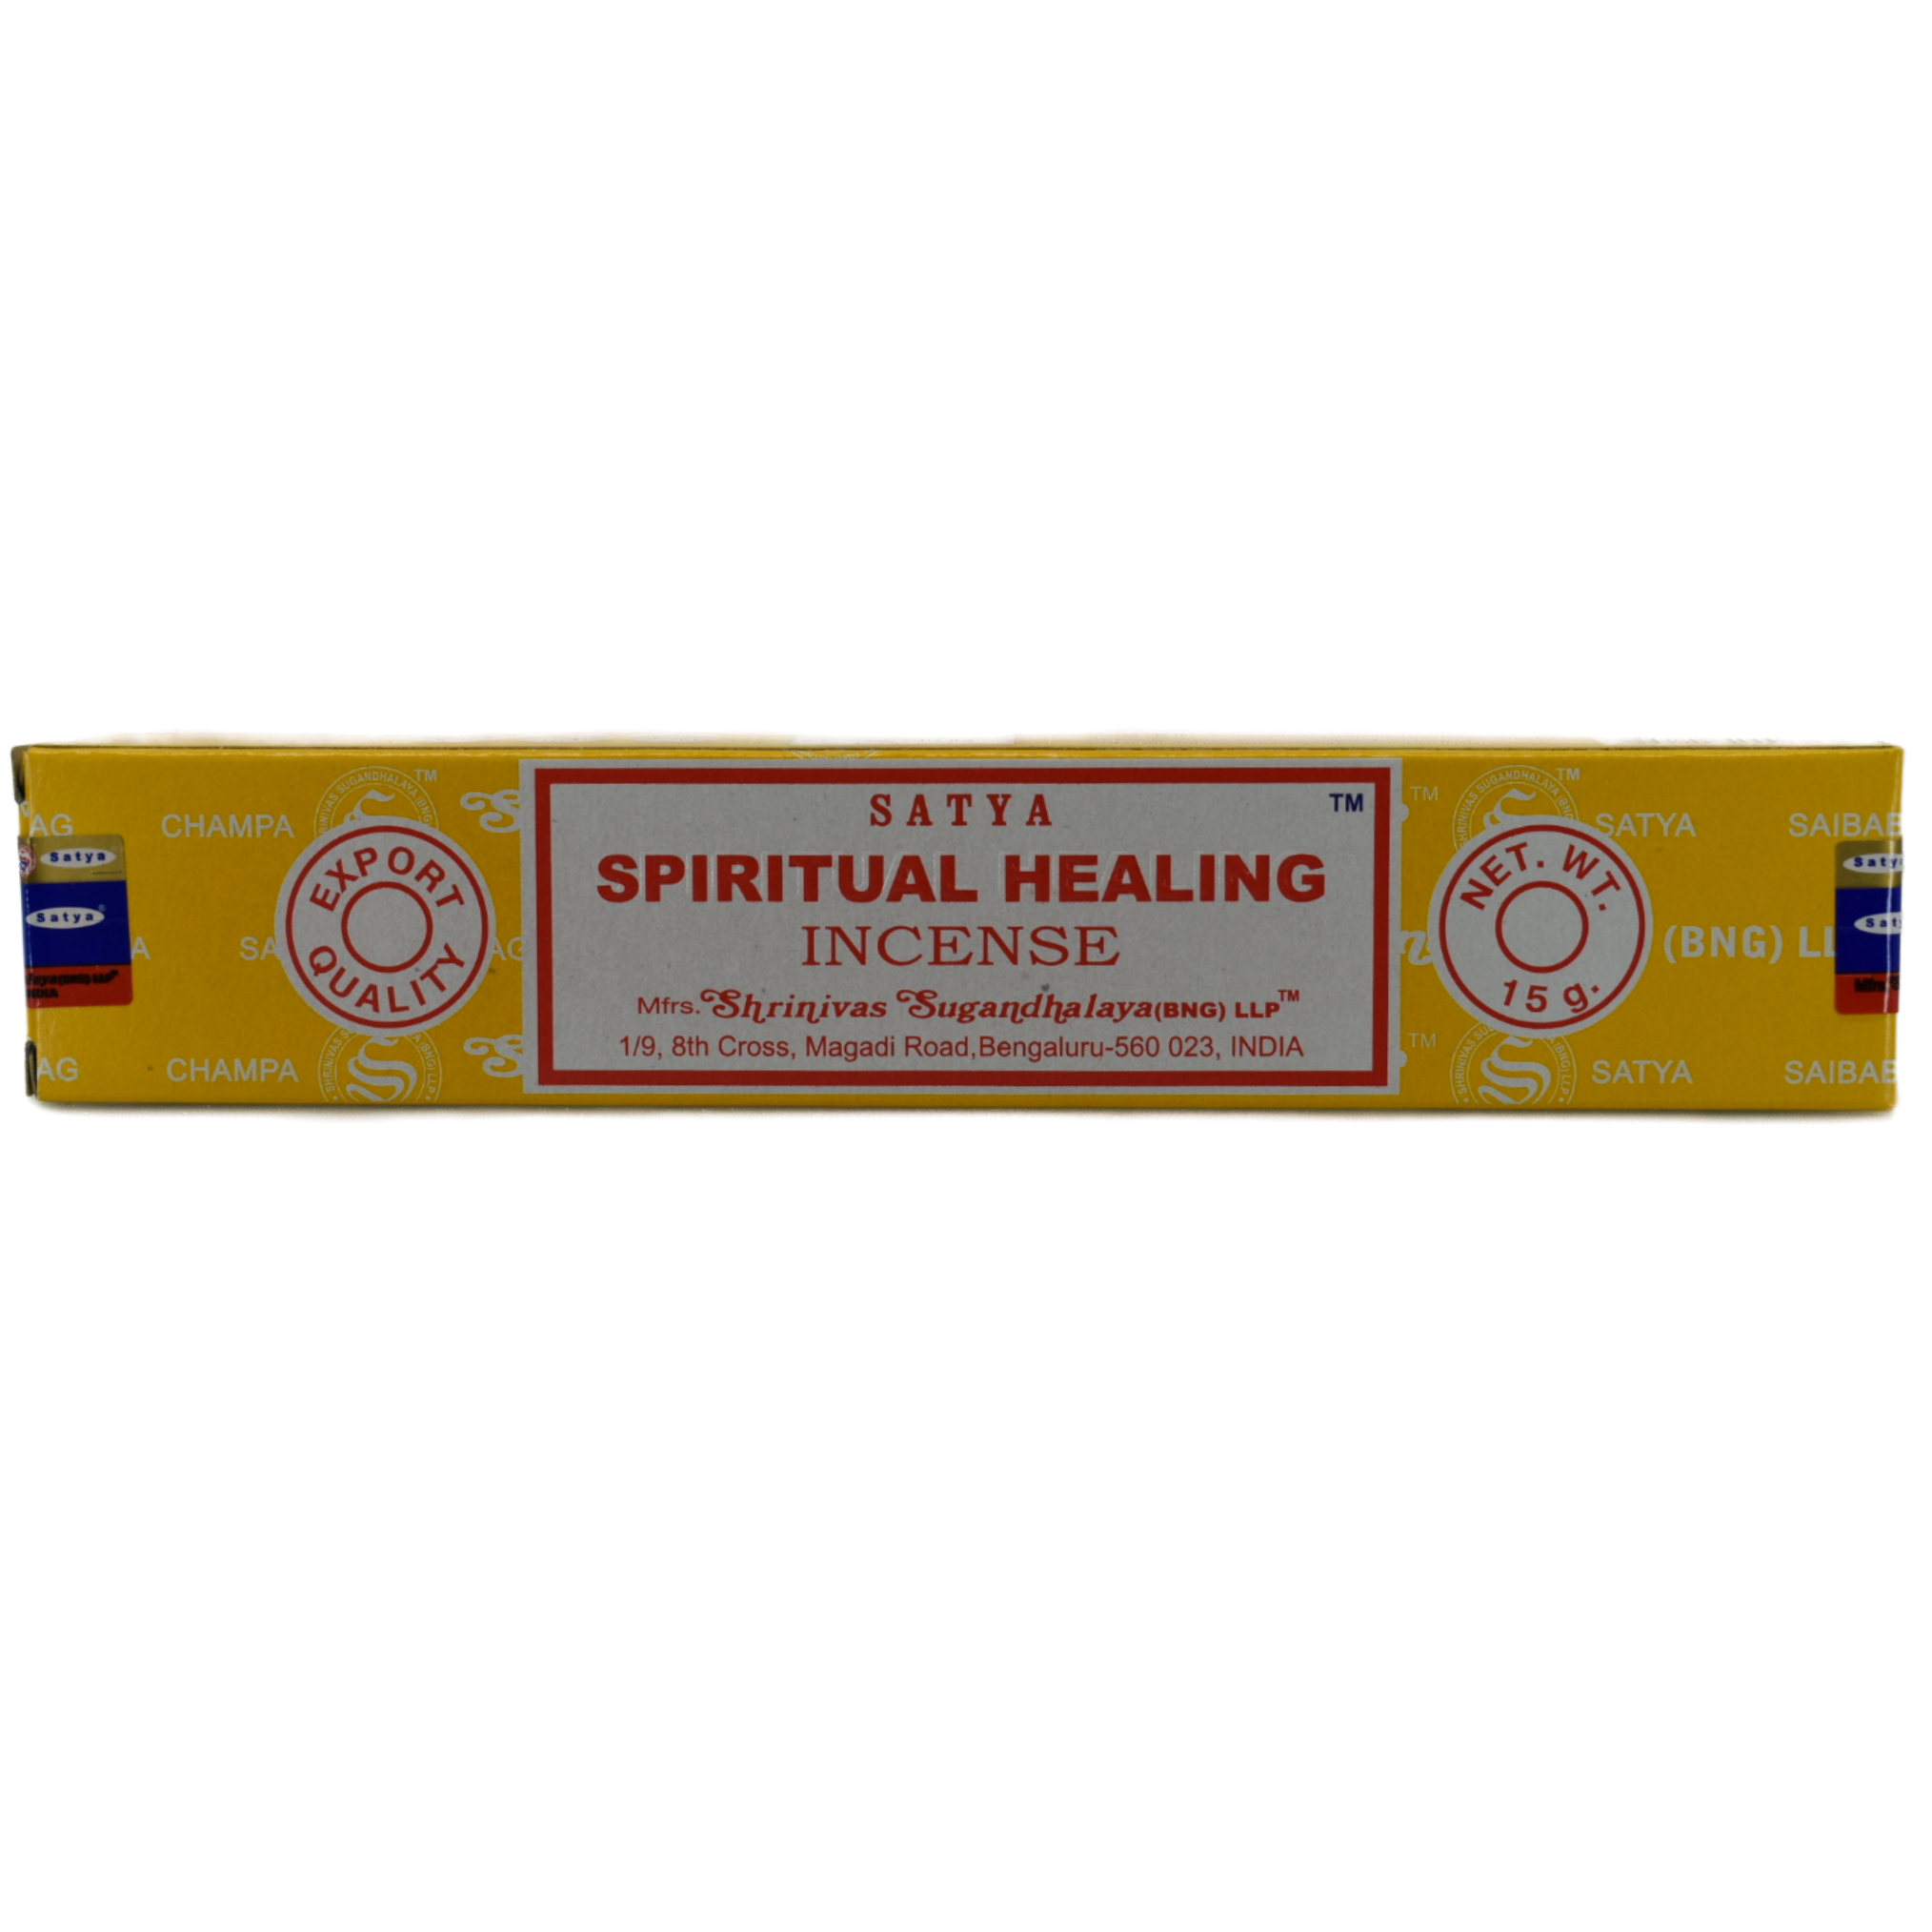 Spiritual Healing 15gr Incense Sticks.  The box is yellow with the design pattern of lines through it.  The lines have company keywords listed in white.  In the center is a rectangular box in white with a red border.  Top row has brand name Satya.  Below it is the title Spiritual Healing Incense.  At the bottom is the manufacturer's information listed.  On each side of the rectangle are a circle.  The left circle says Export Quality.  The right circle says Net. Weight 15 grams.